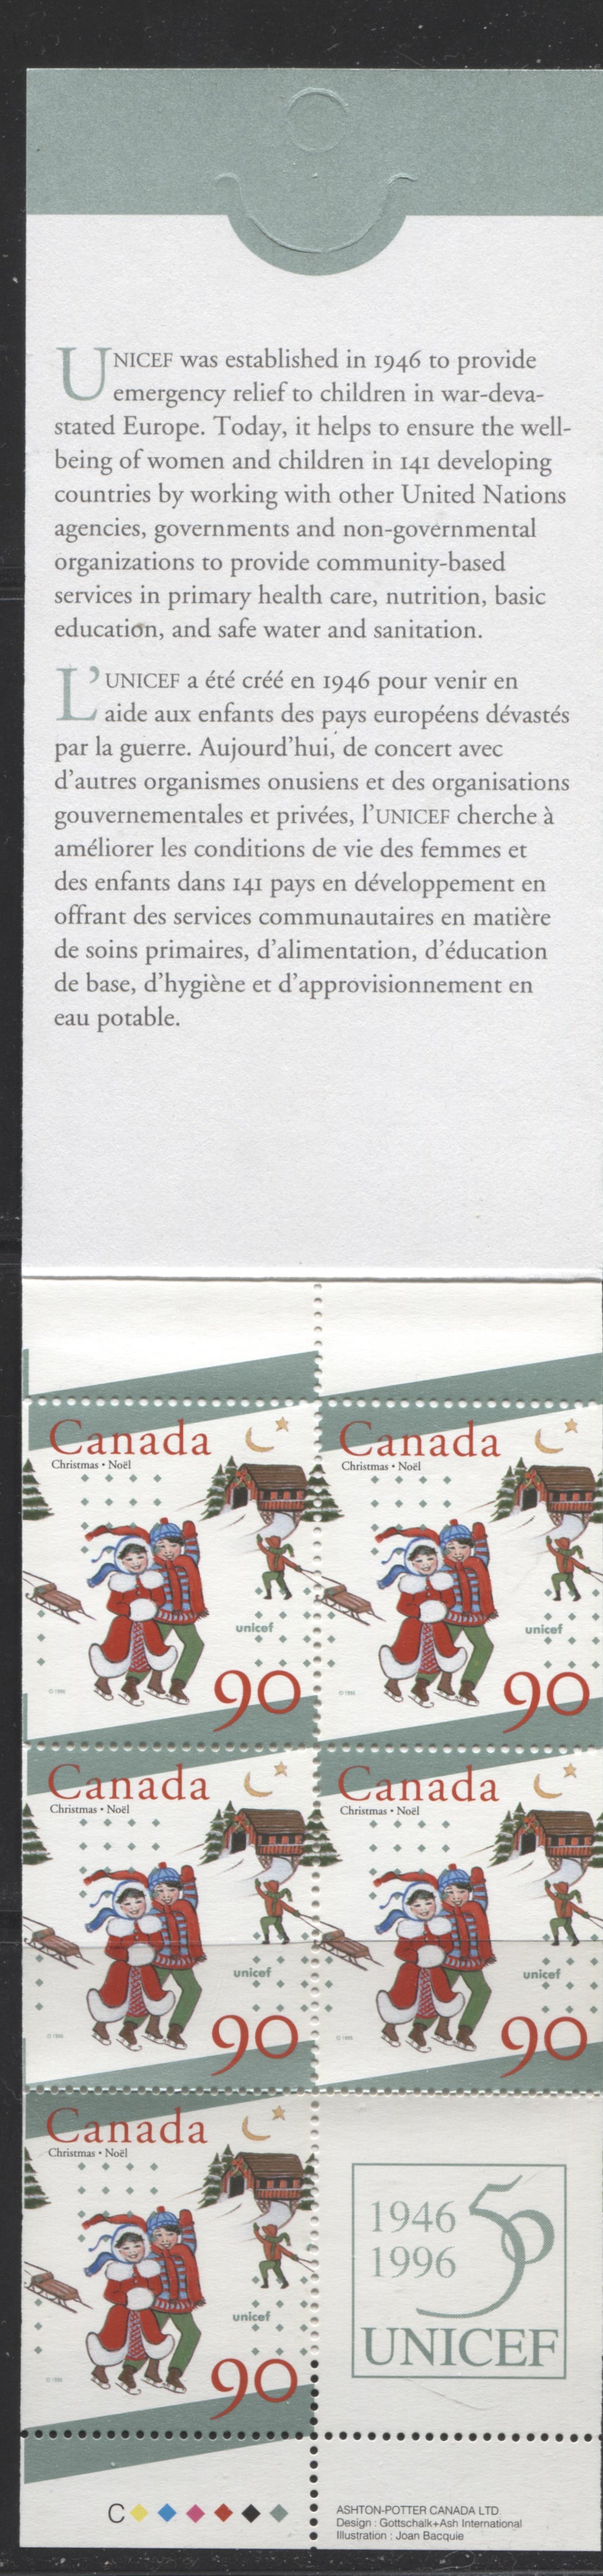 Canada #BK198a-b 1996 Christmas Issue, Complete $4.50 Booklet, Coated Papers Paper, Dead Paper, 4 mm GT-2 Tagging Brixton Chrome 